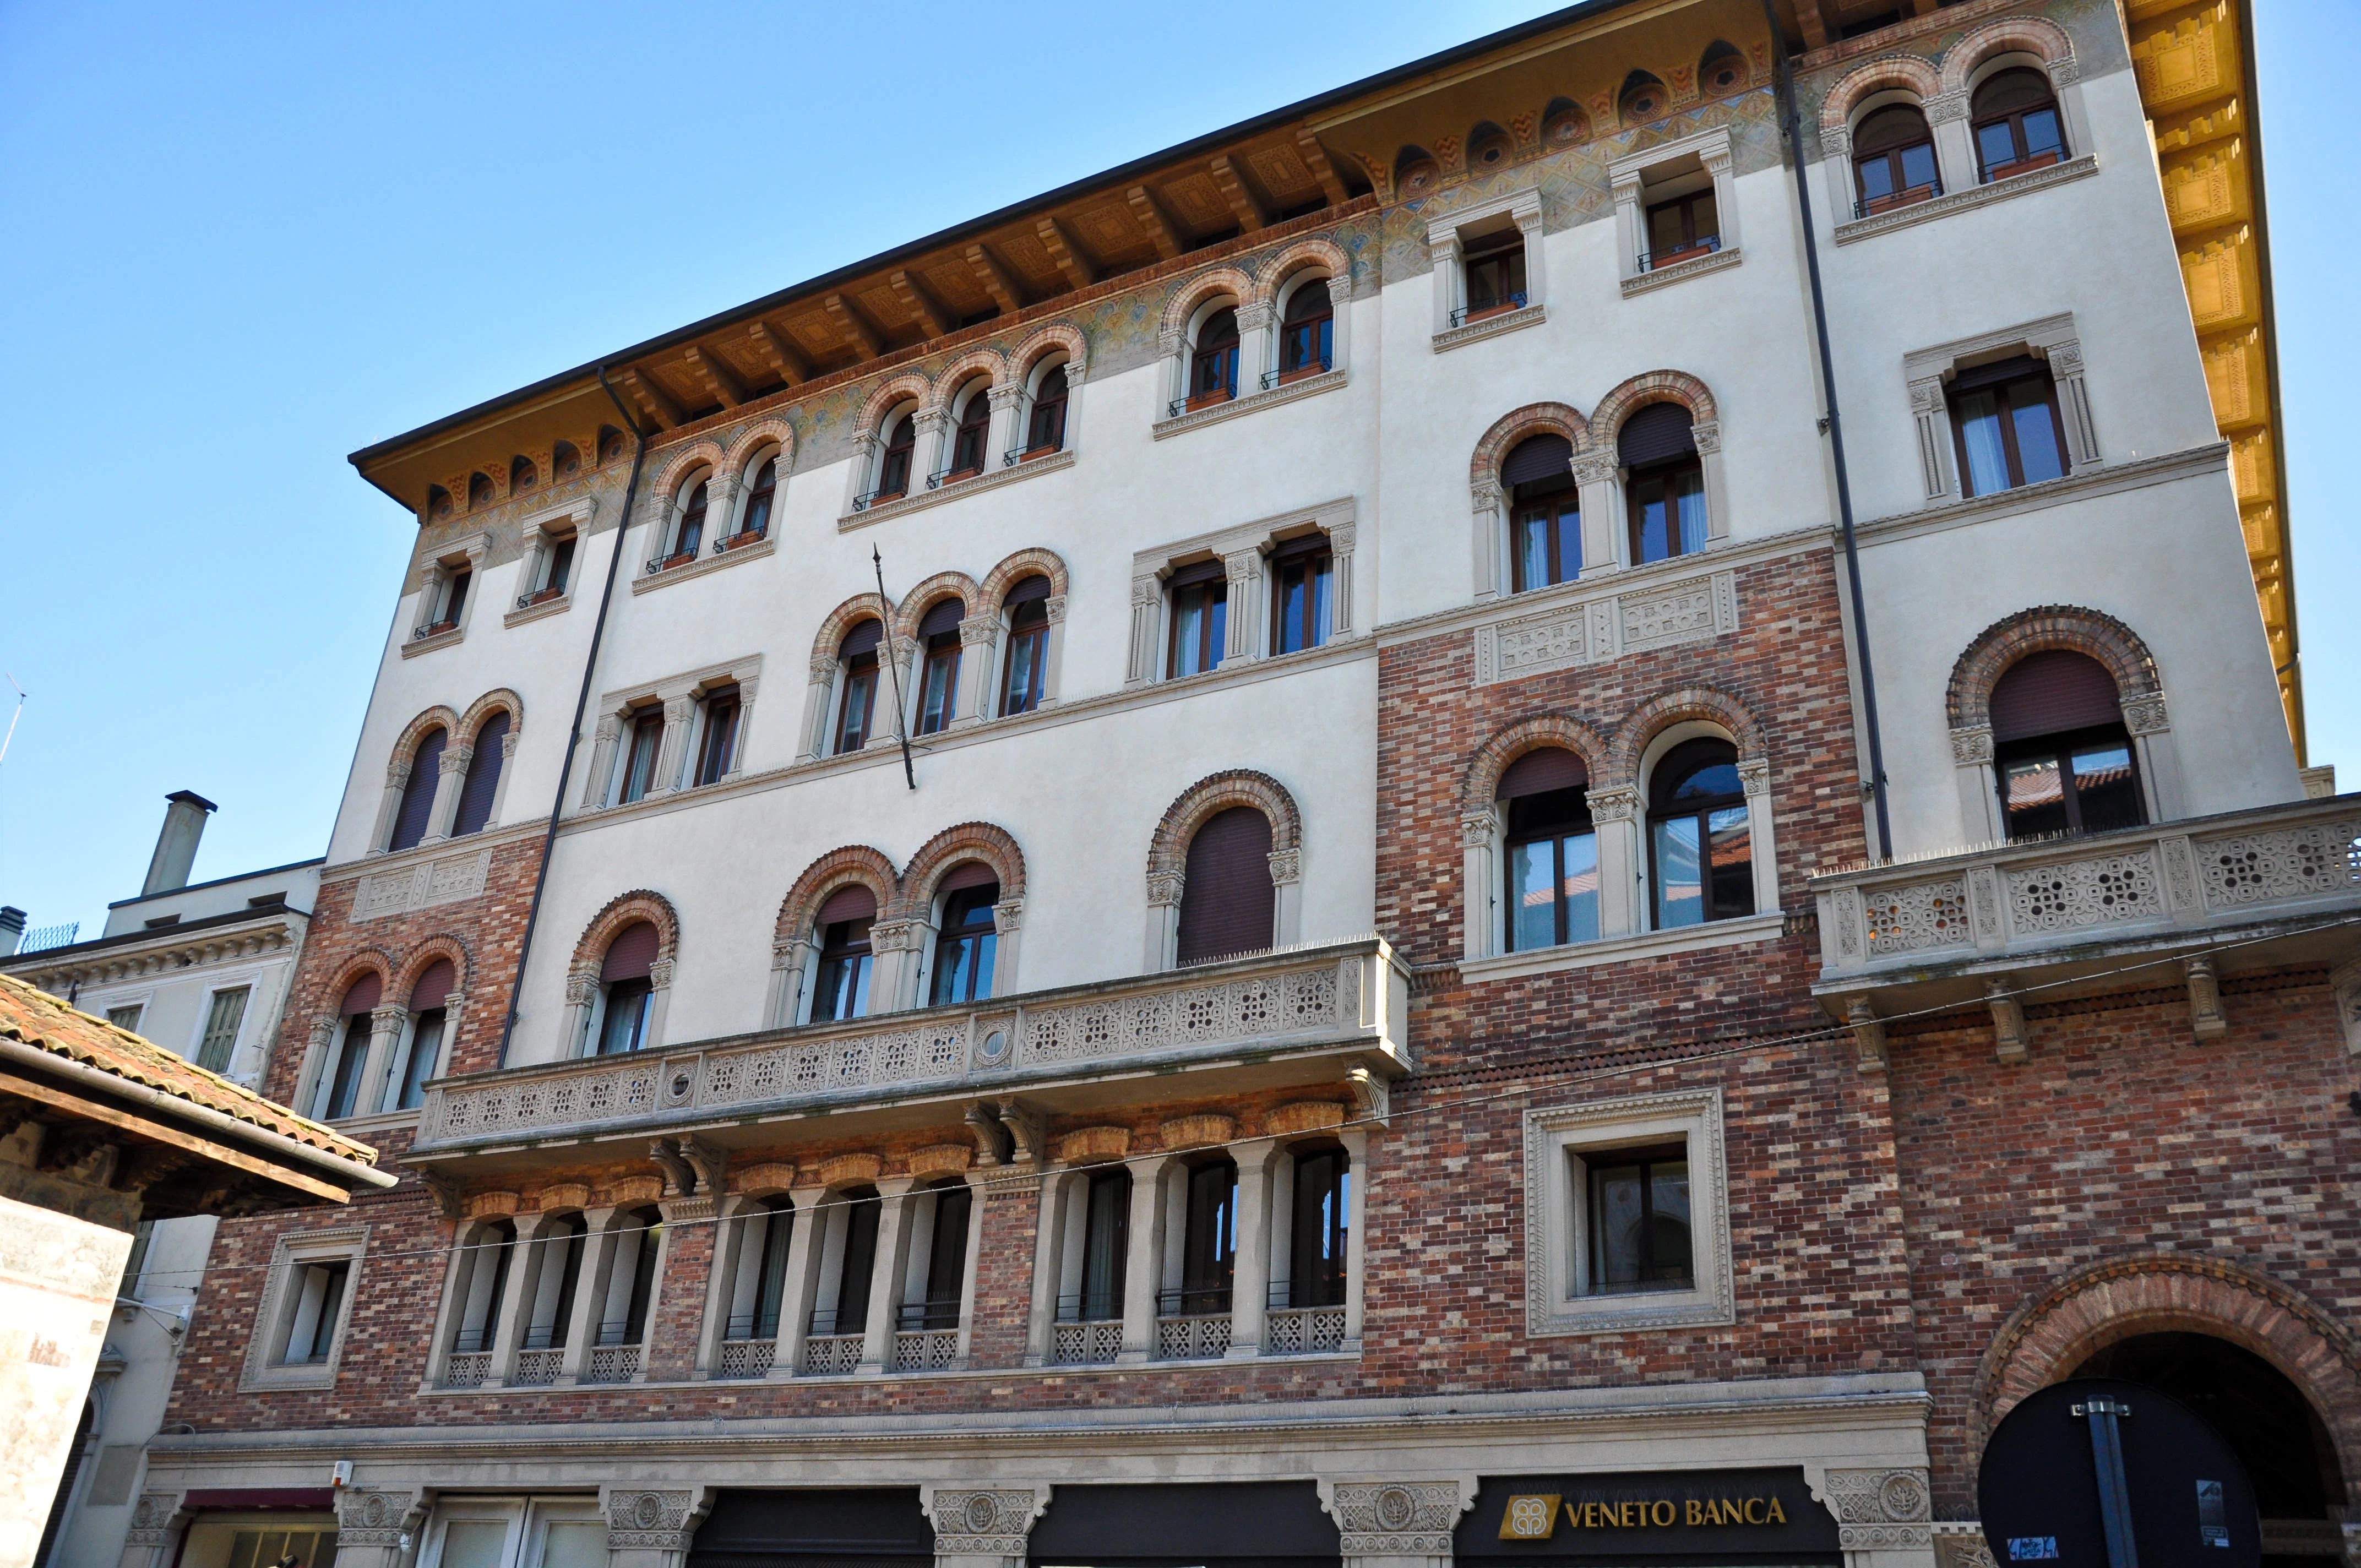 A beautiful building in Treviso - Veneto, Italy - www.rossiwrites.com